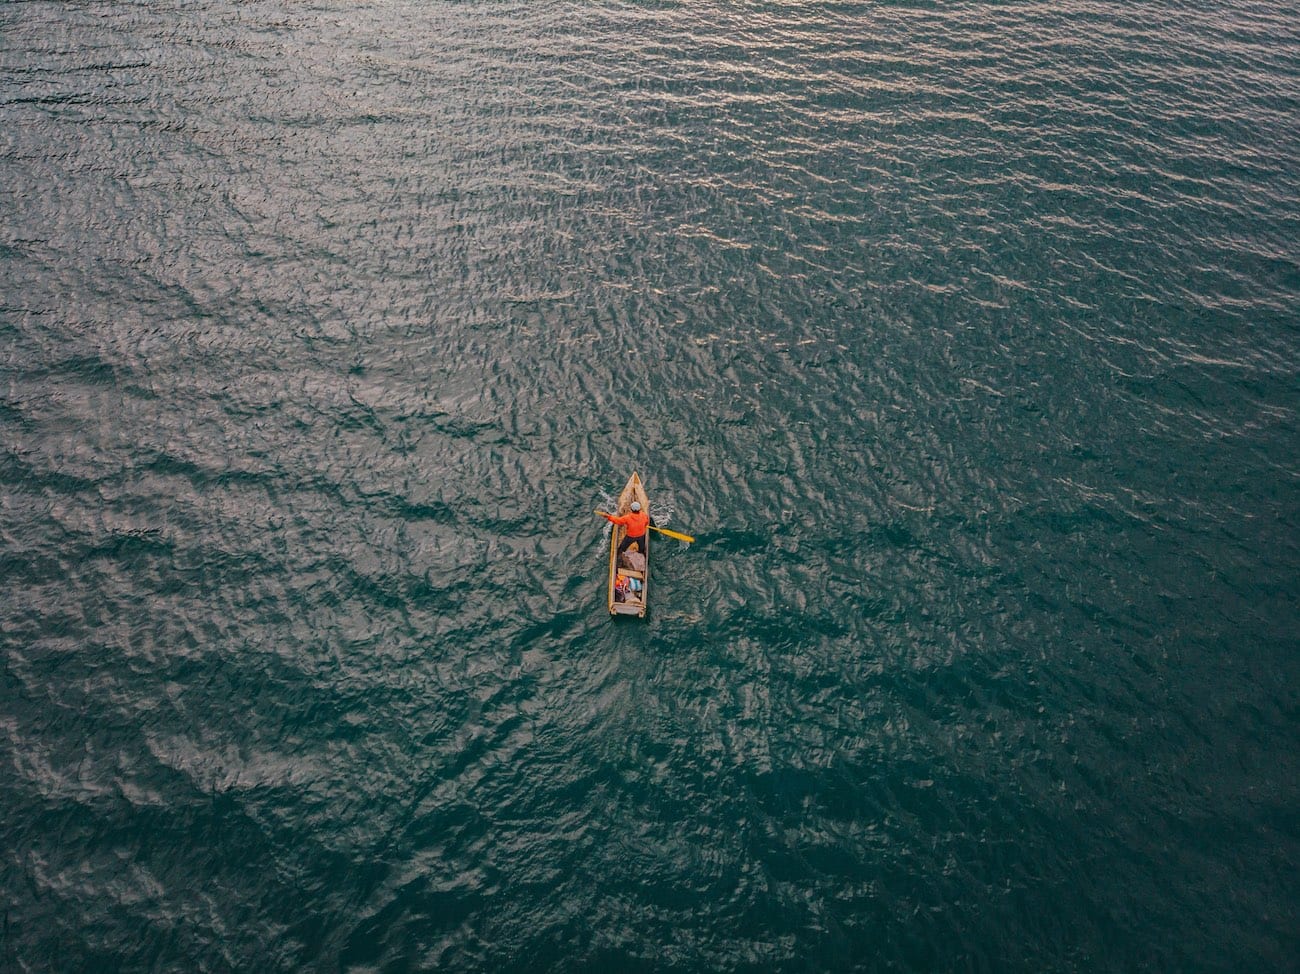 Overhead view of a person rowing in a boat in a vast body of water